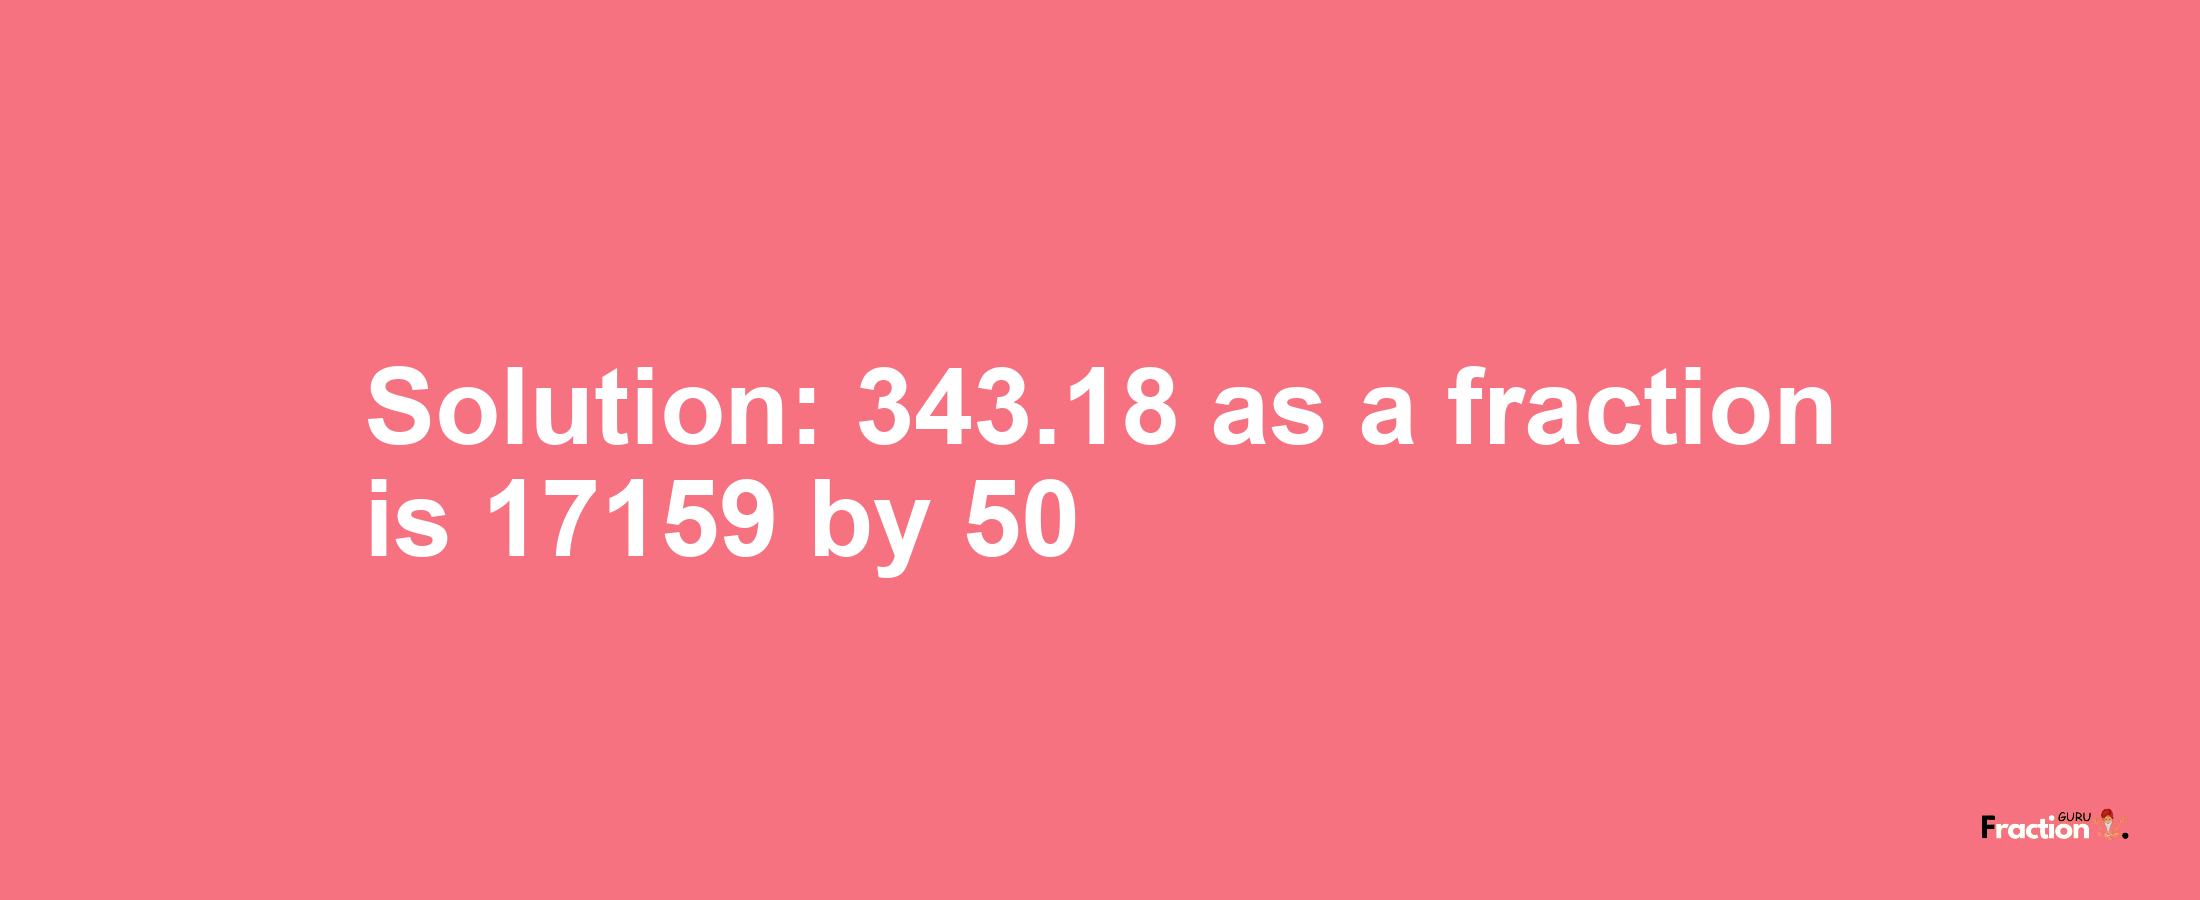 Solution:343.18 as a fraction is 17159/50